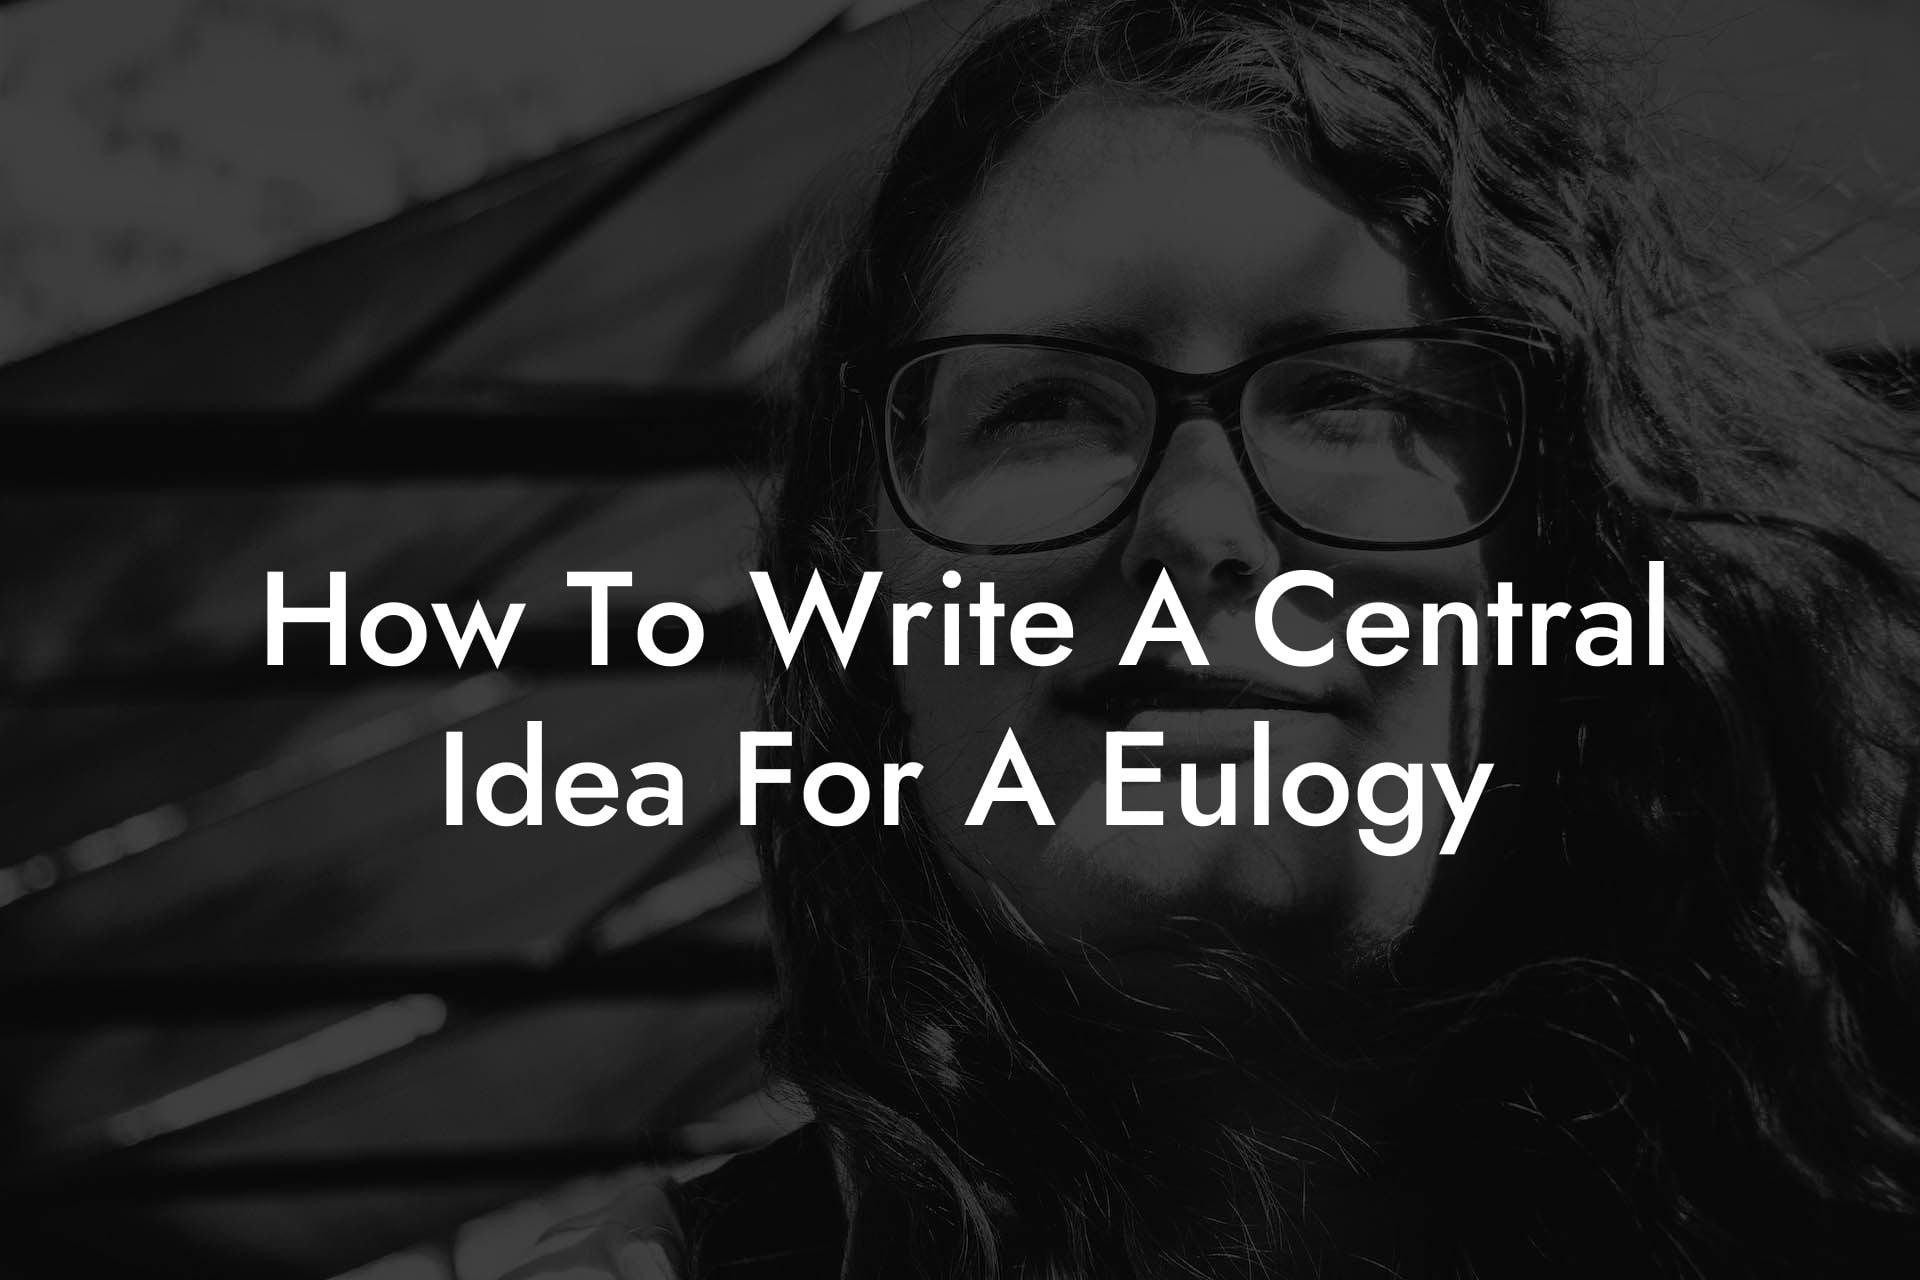 How To Write A Central Idea For A Eulogy